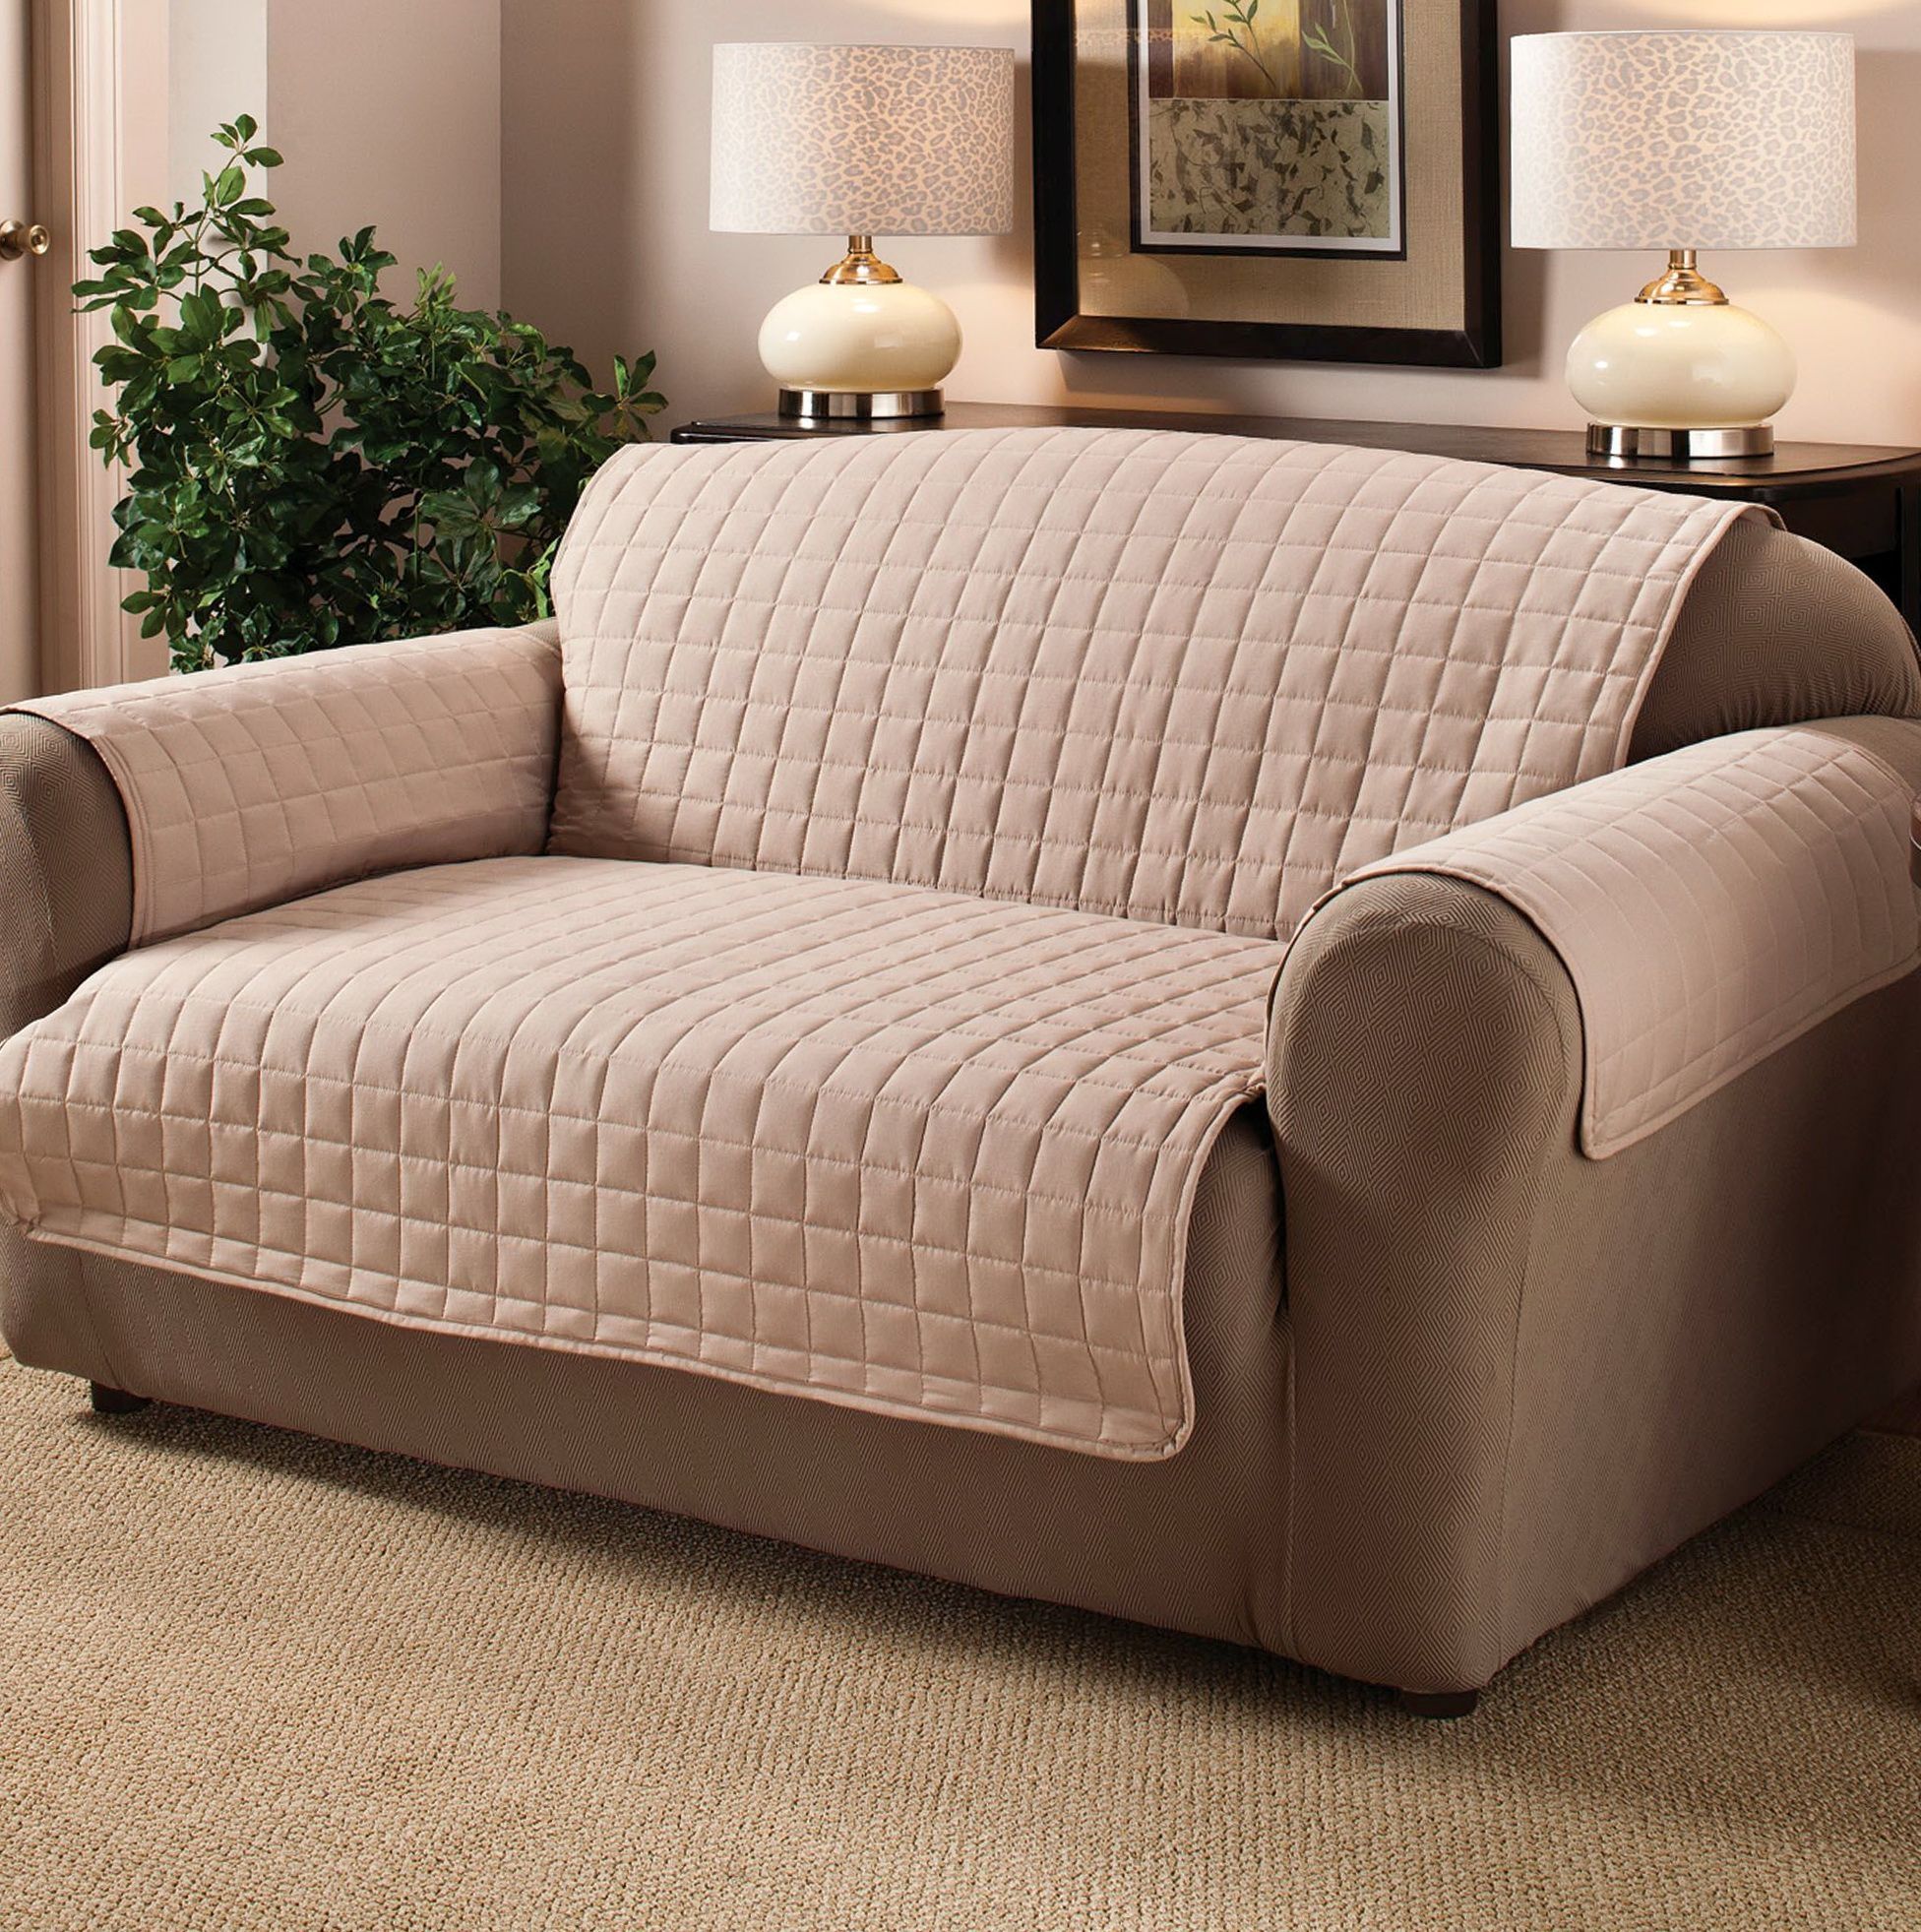 Furniture Perfect Living Room With Sofa Slipcovers Walmart For Throughout Contemporary Sofa Slipcovers (View 6 of 12)